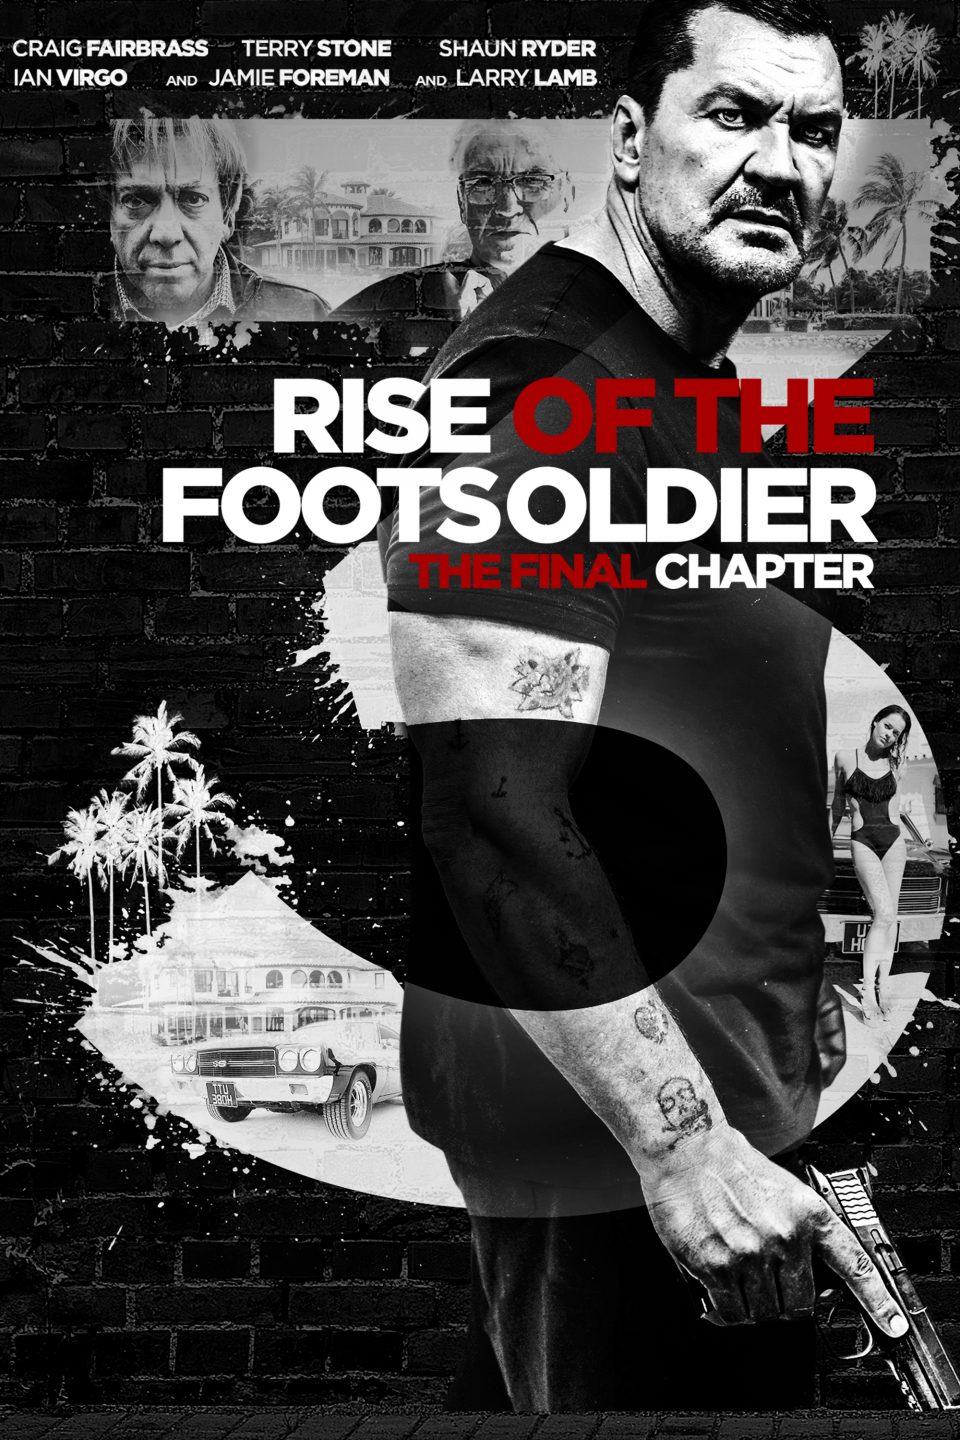 Return Of The Footsoldier III: The Final Chapter (Lionsgate Home Entertainment)